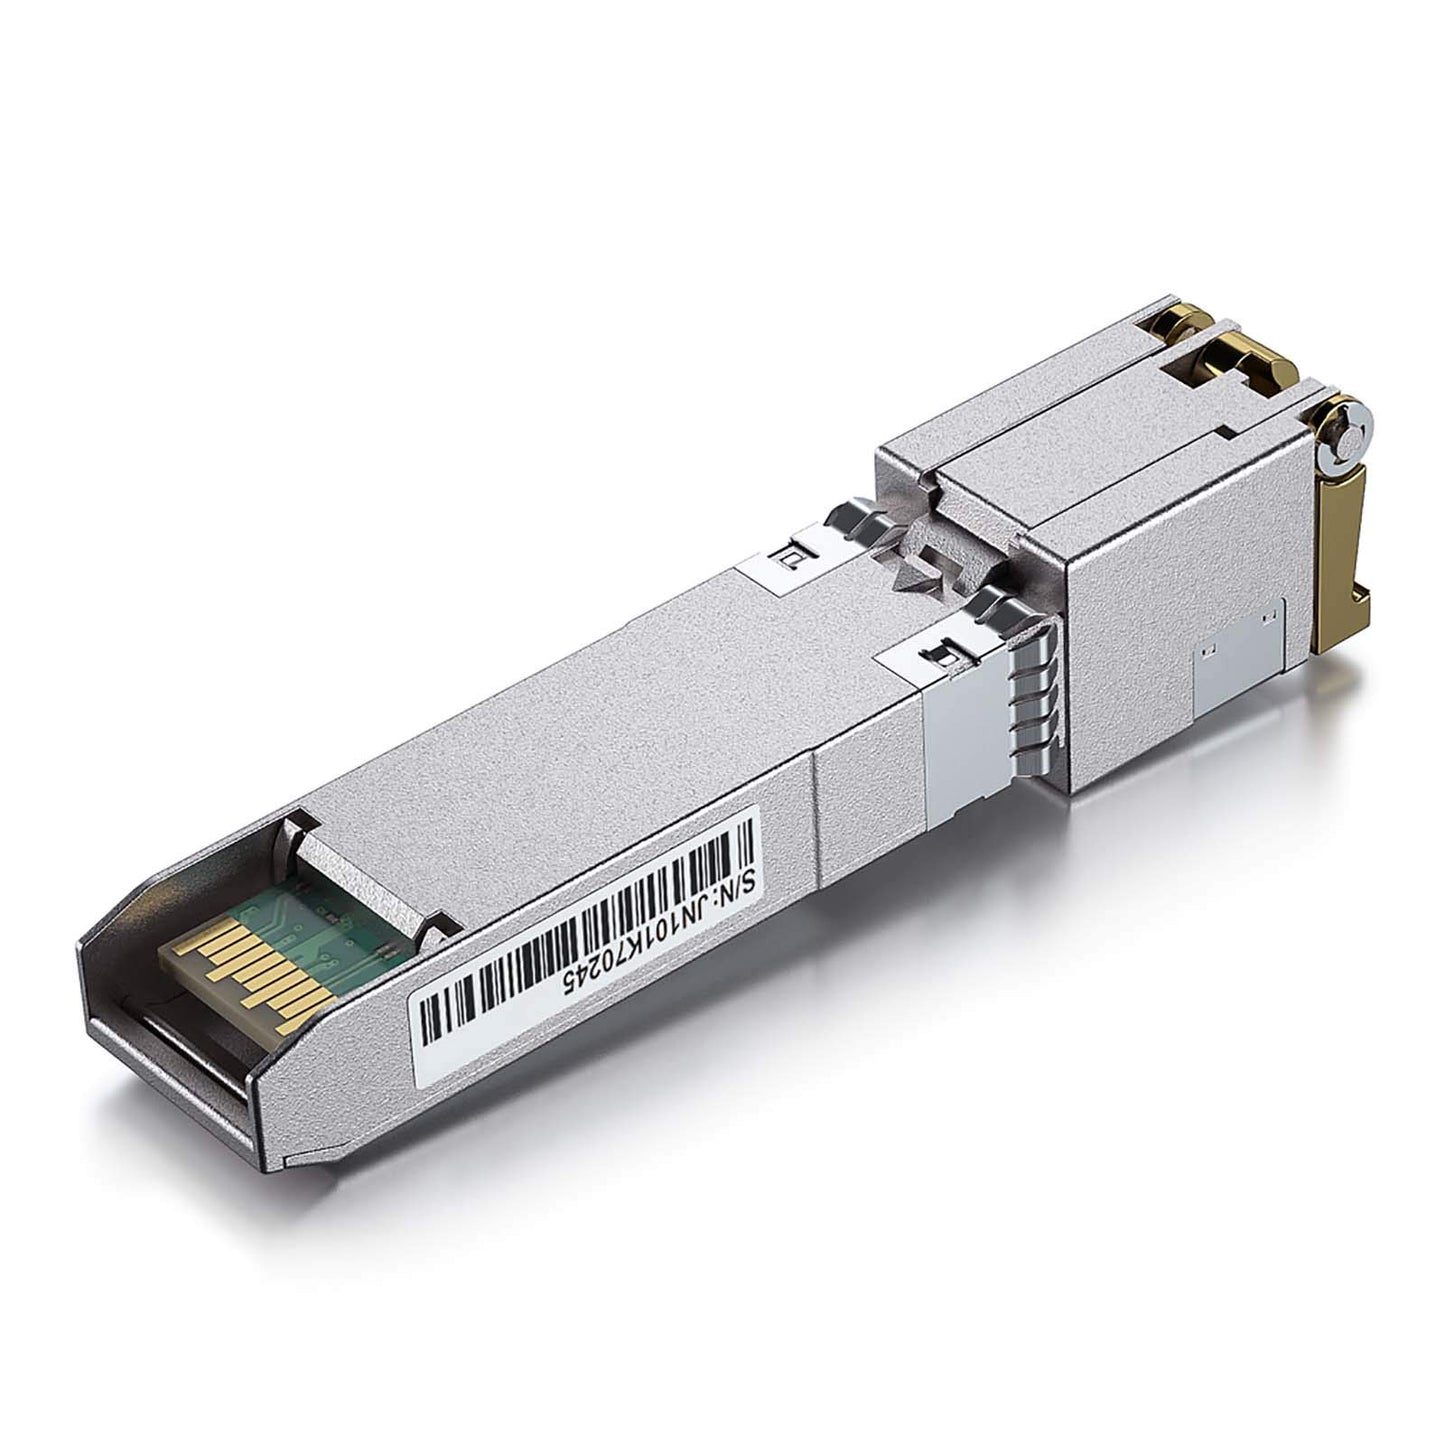 10GBase-T SFP+ Transceiver, 10G T, 10G Copper, RJ-45 SFP+ CAT.6a, up to 30 meters, Compatible with Cisco SFP-10G-T-S, and More